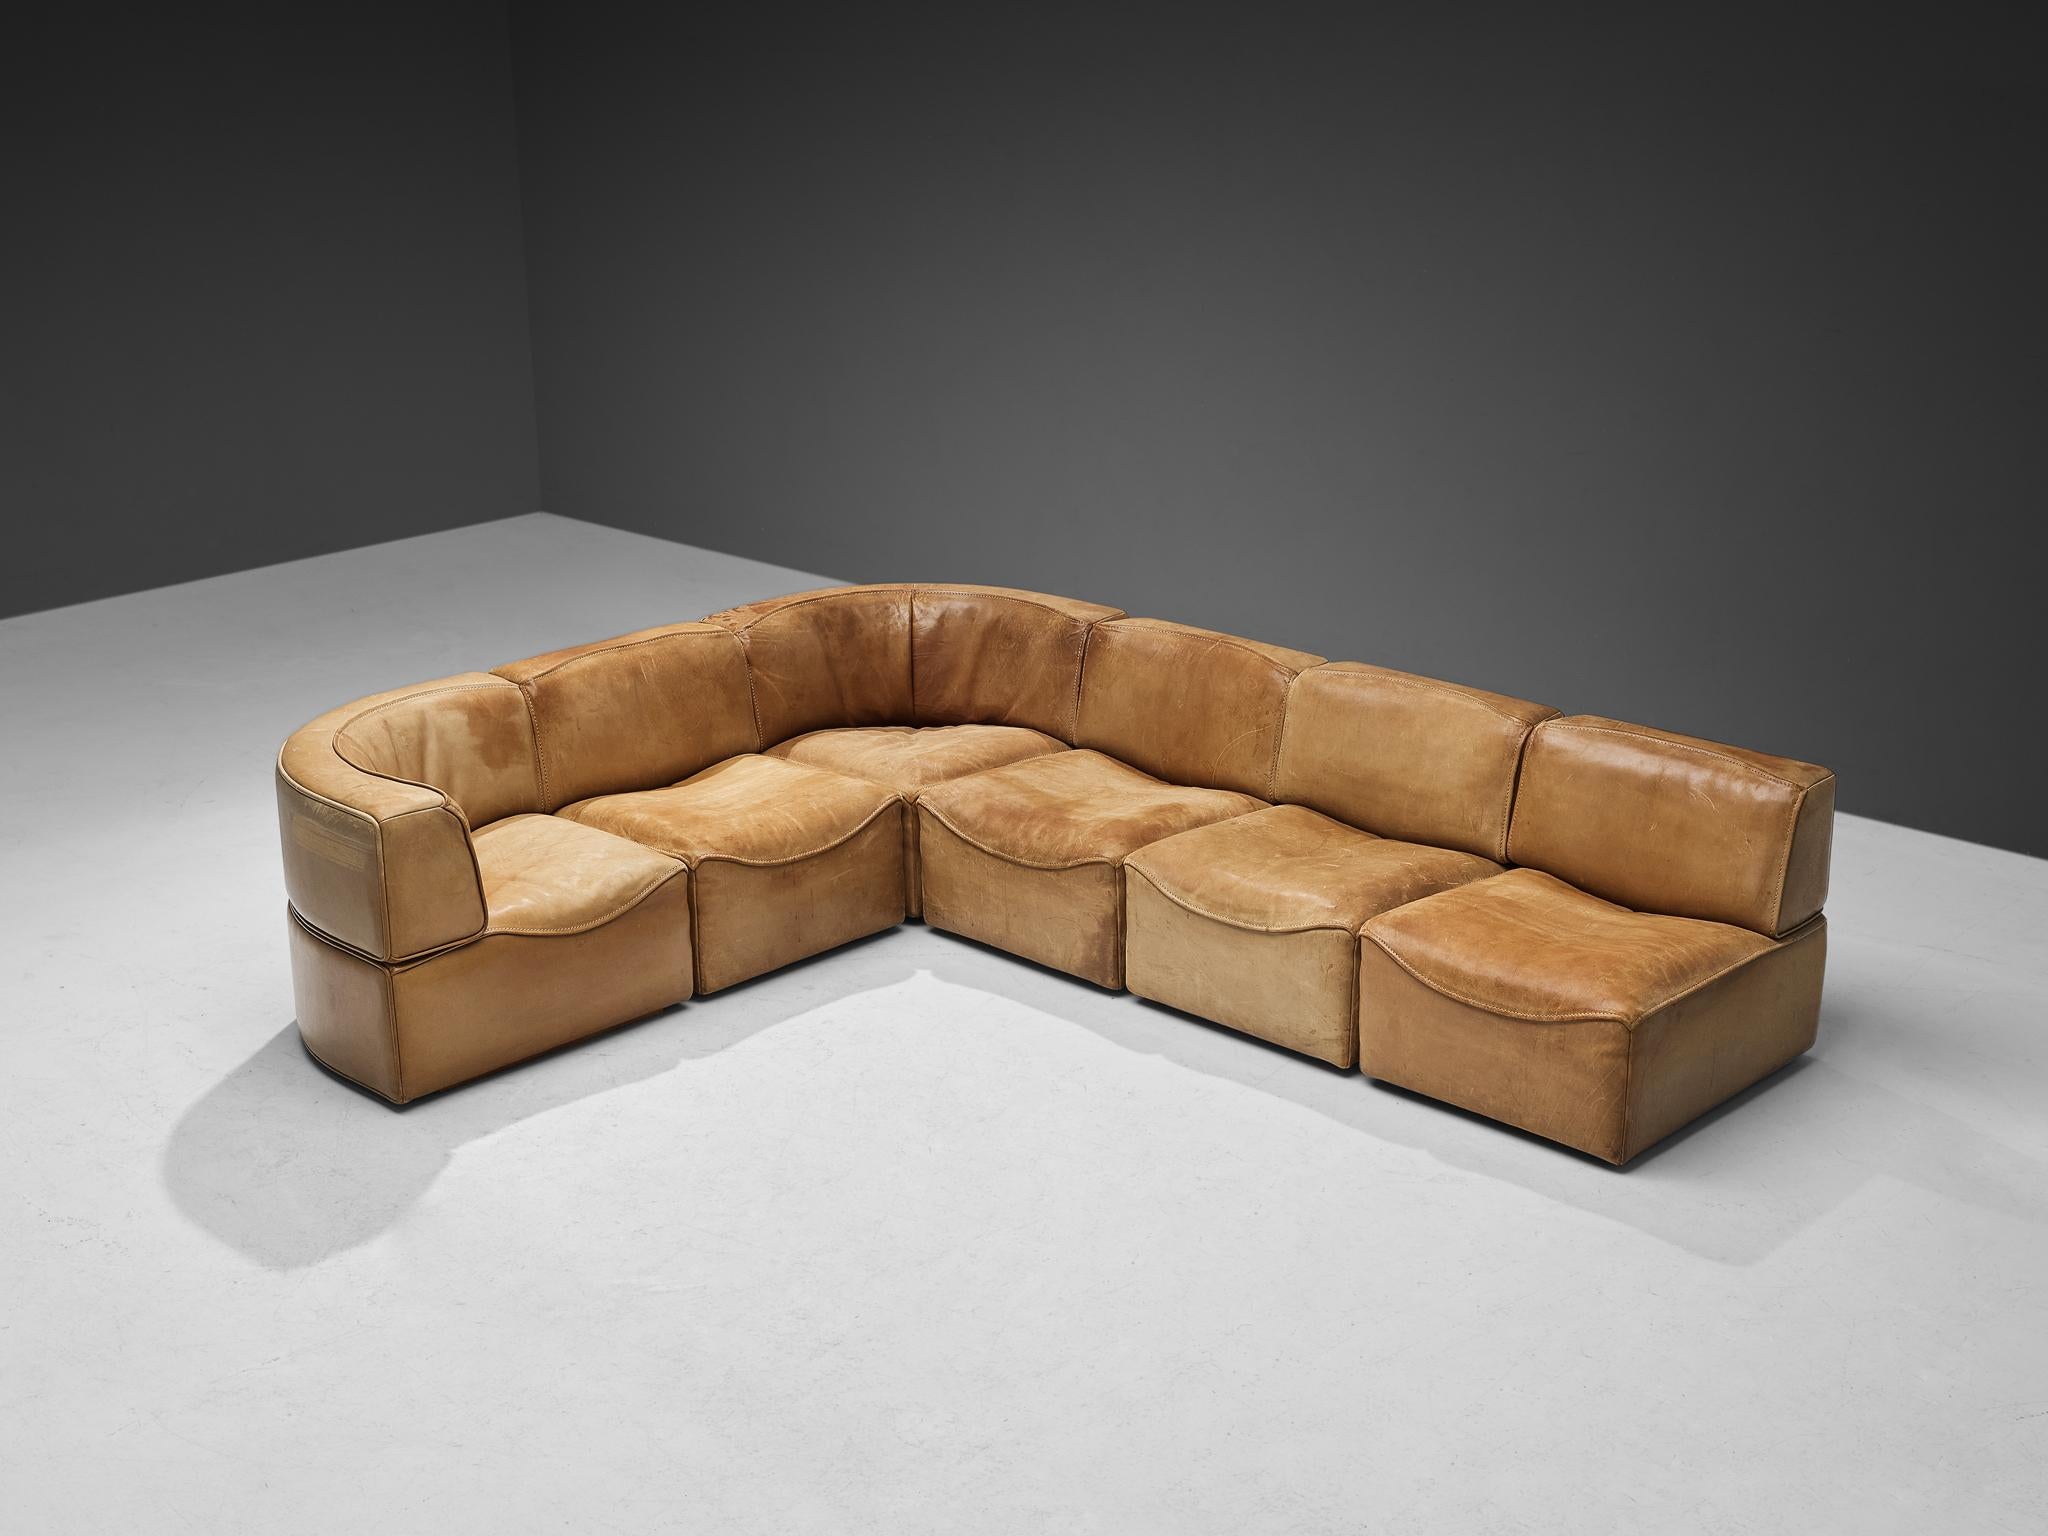 De Sede, 'DS-15' sectional sofa, patinated leather, Switzerland, 1970s.

This high-quality sectional sofa designed by De Sede in the 1970s contains four regular elements and two corner elements, making it possible to arrange this sofa to your own